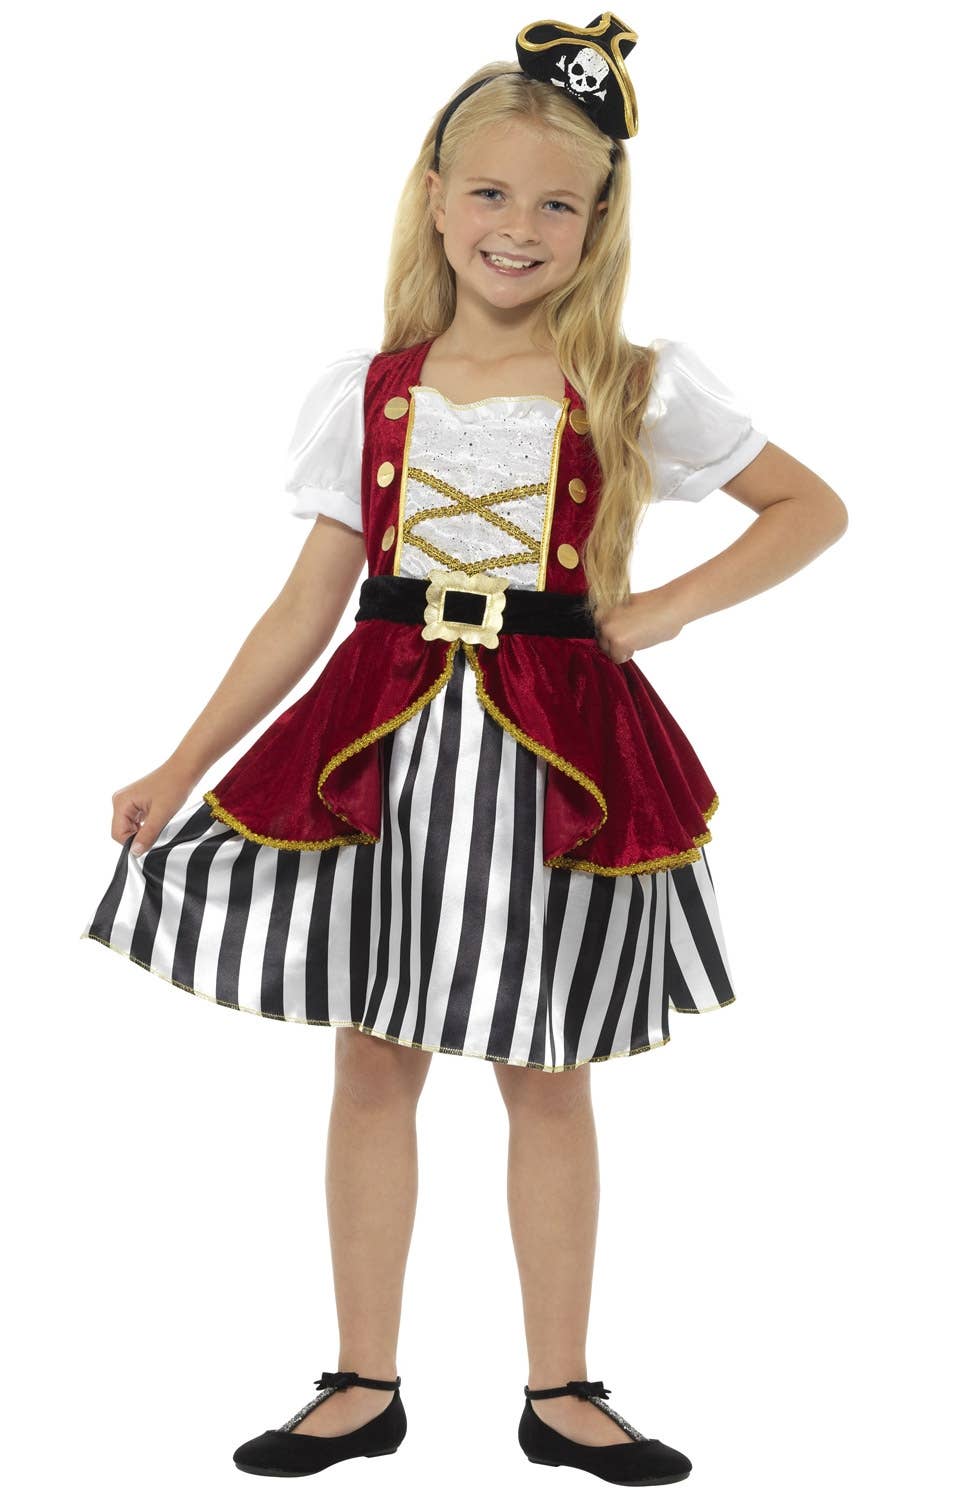 Kid's Pirate Girl's Deluxe Fancy Dress Costume Front View